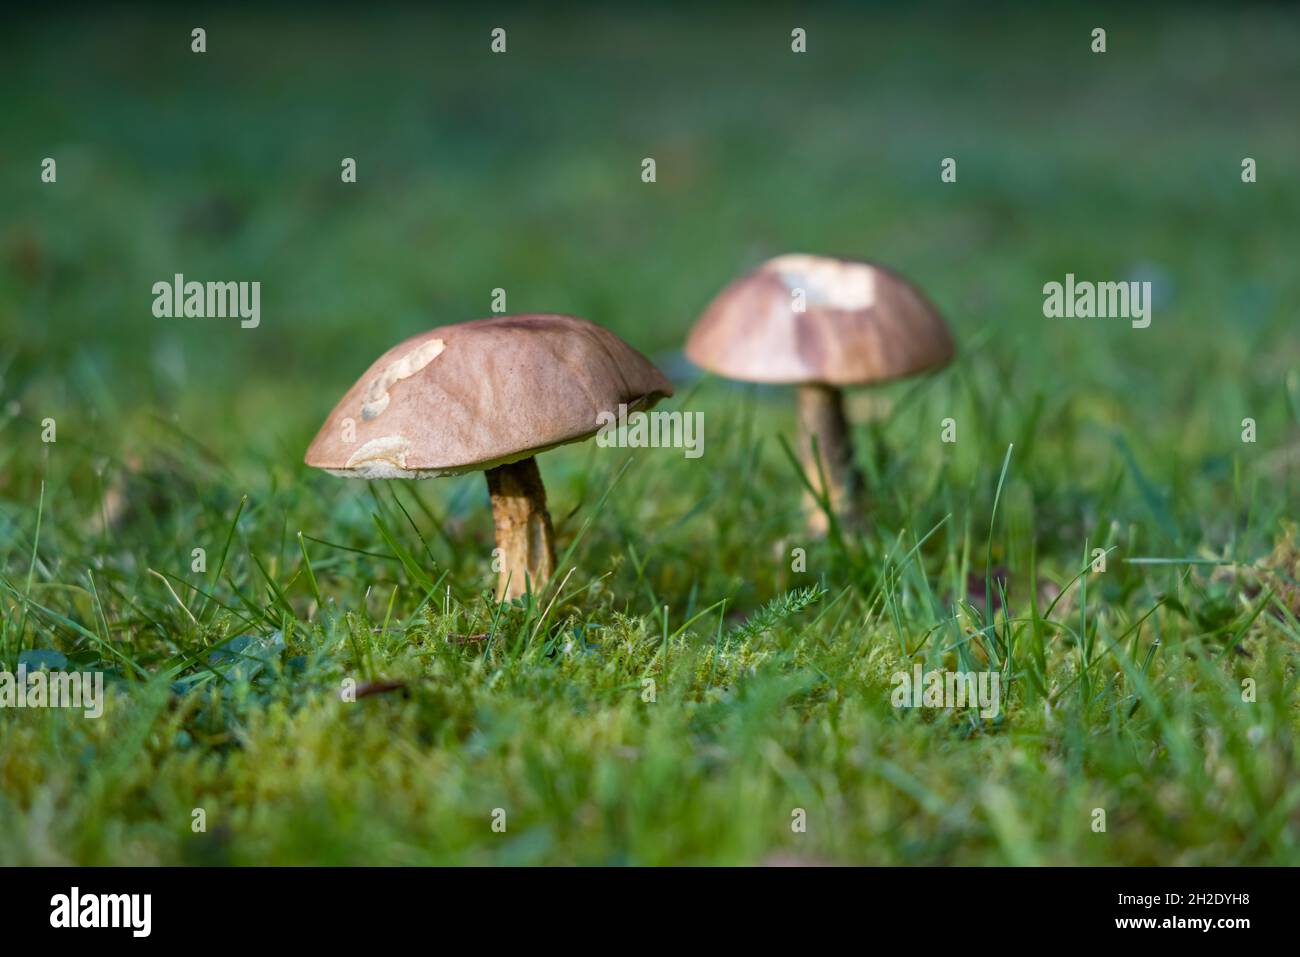 A pair of large brown toadstool fruiting bodies damaged by being eaten by slugs growing in grass in autumn in a garden in Surrey, south-east England Stock Photo